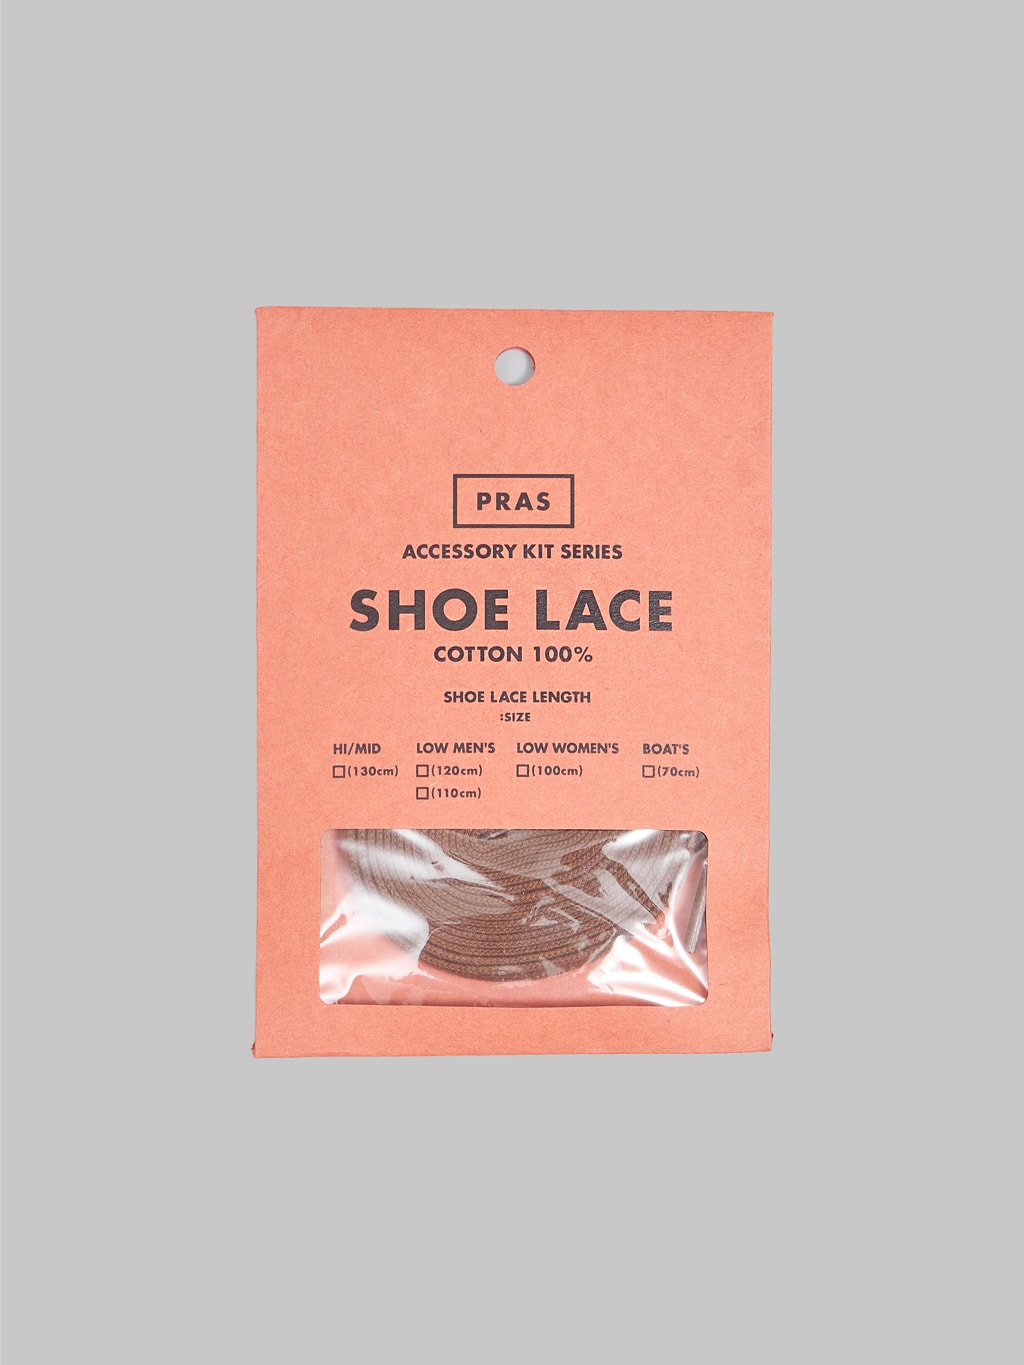 pras shoe lace brown packaging front view